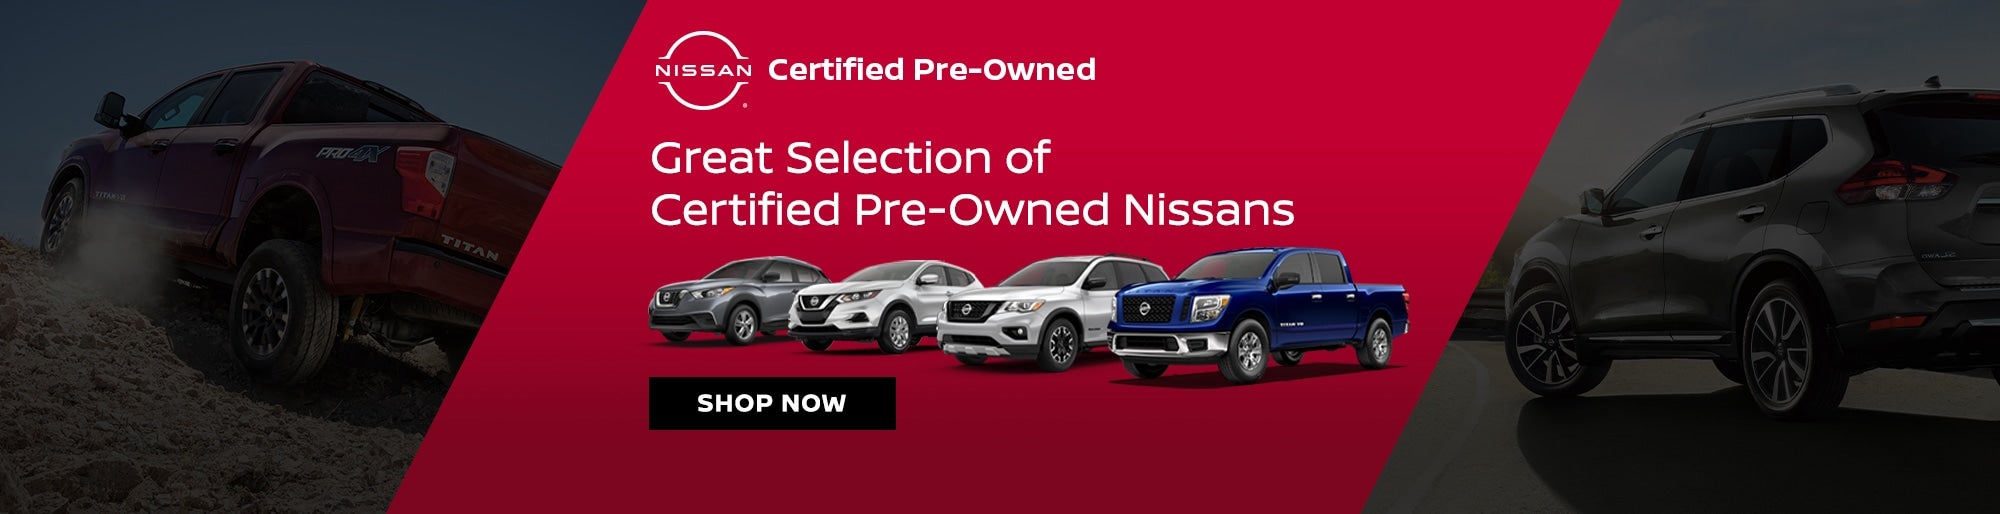 Shop Certified Vehicles at Nissan of Pittsfield Pittsfield MA